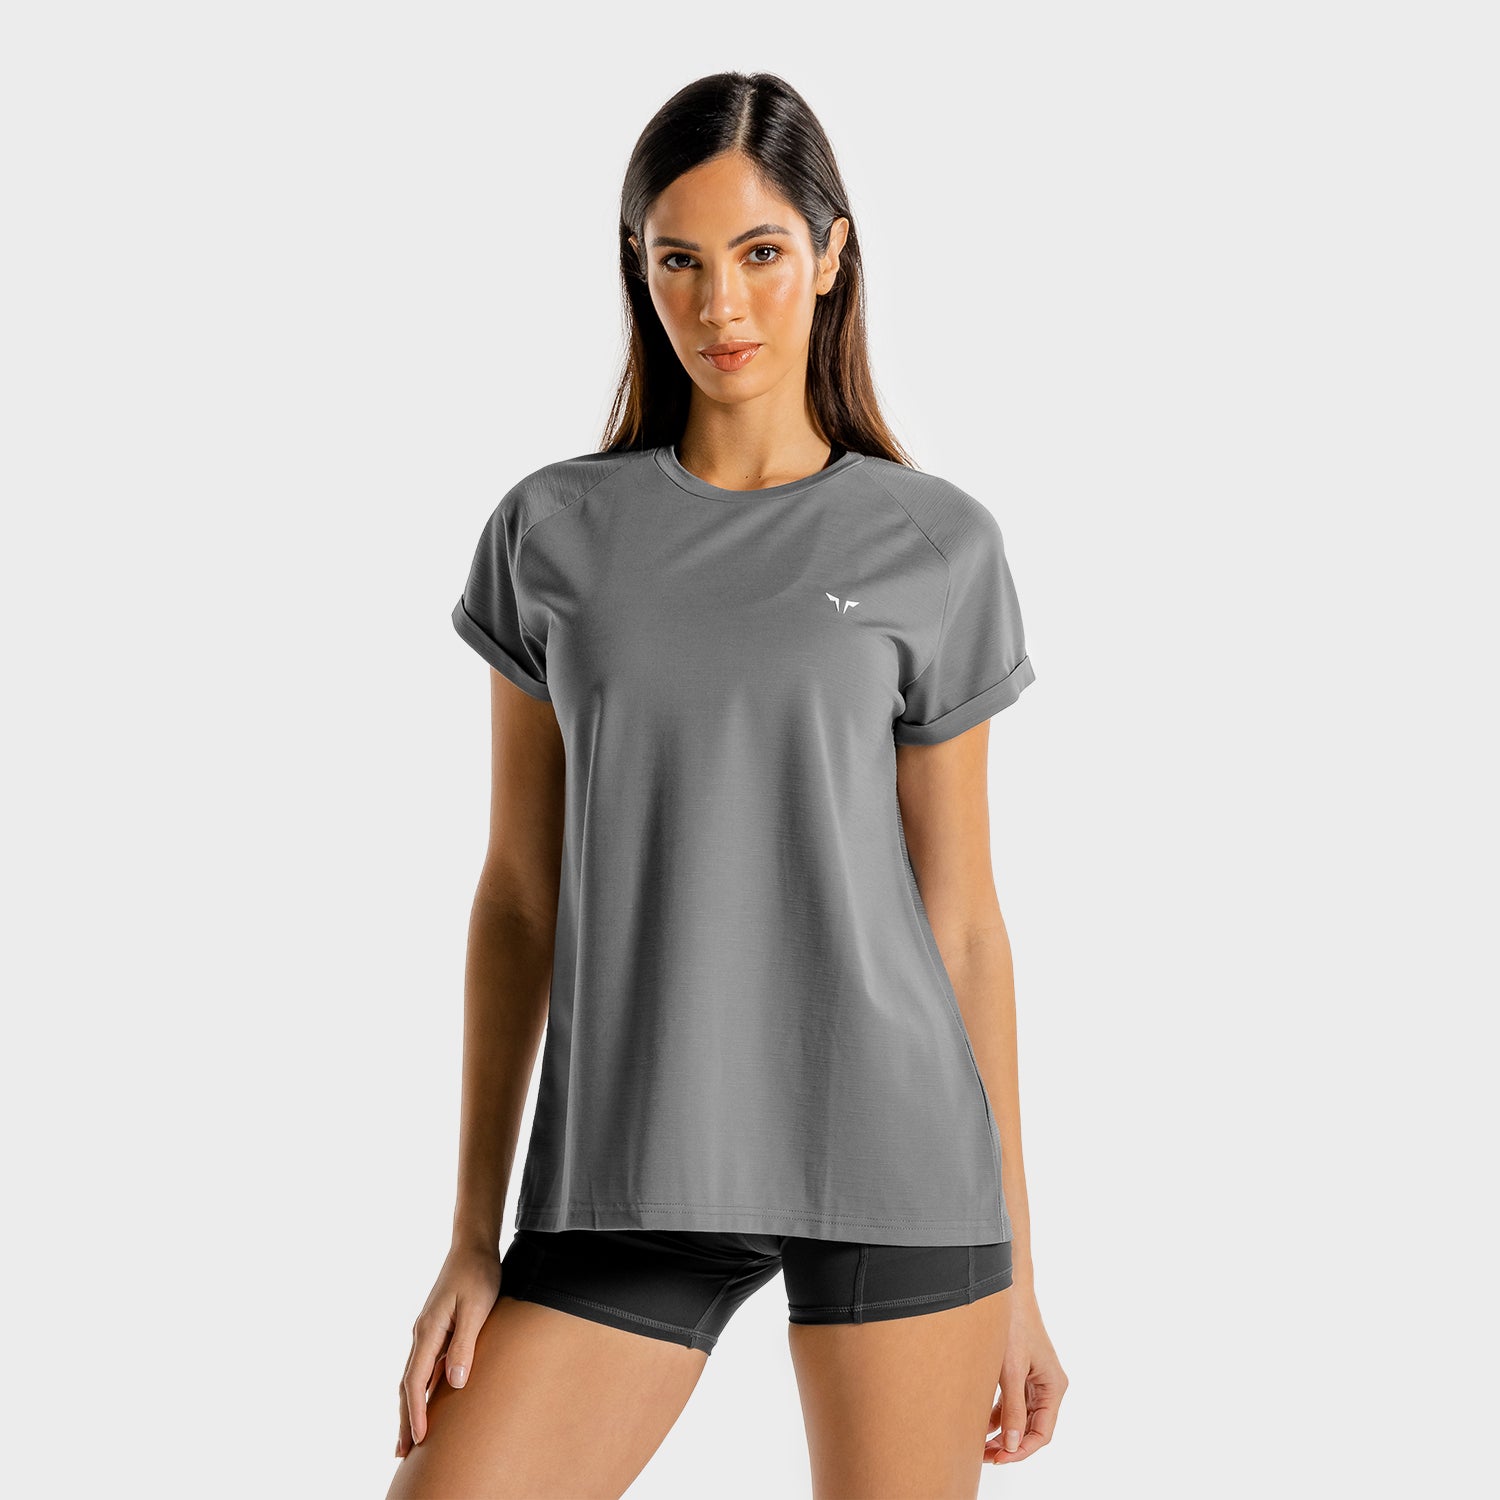 ID, Core Loose Fit Tee - Grey, Workout Shirts Women